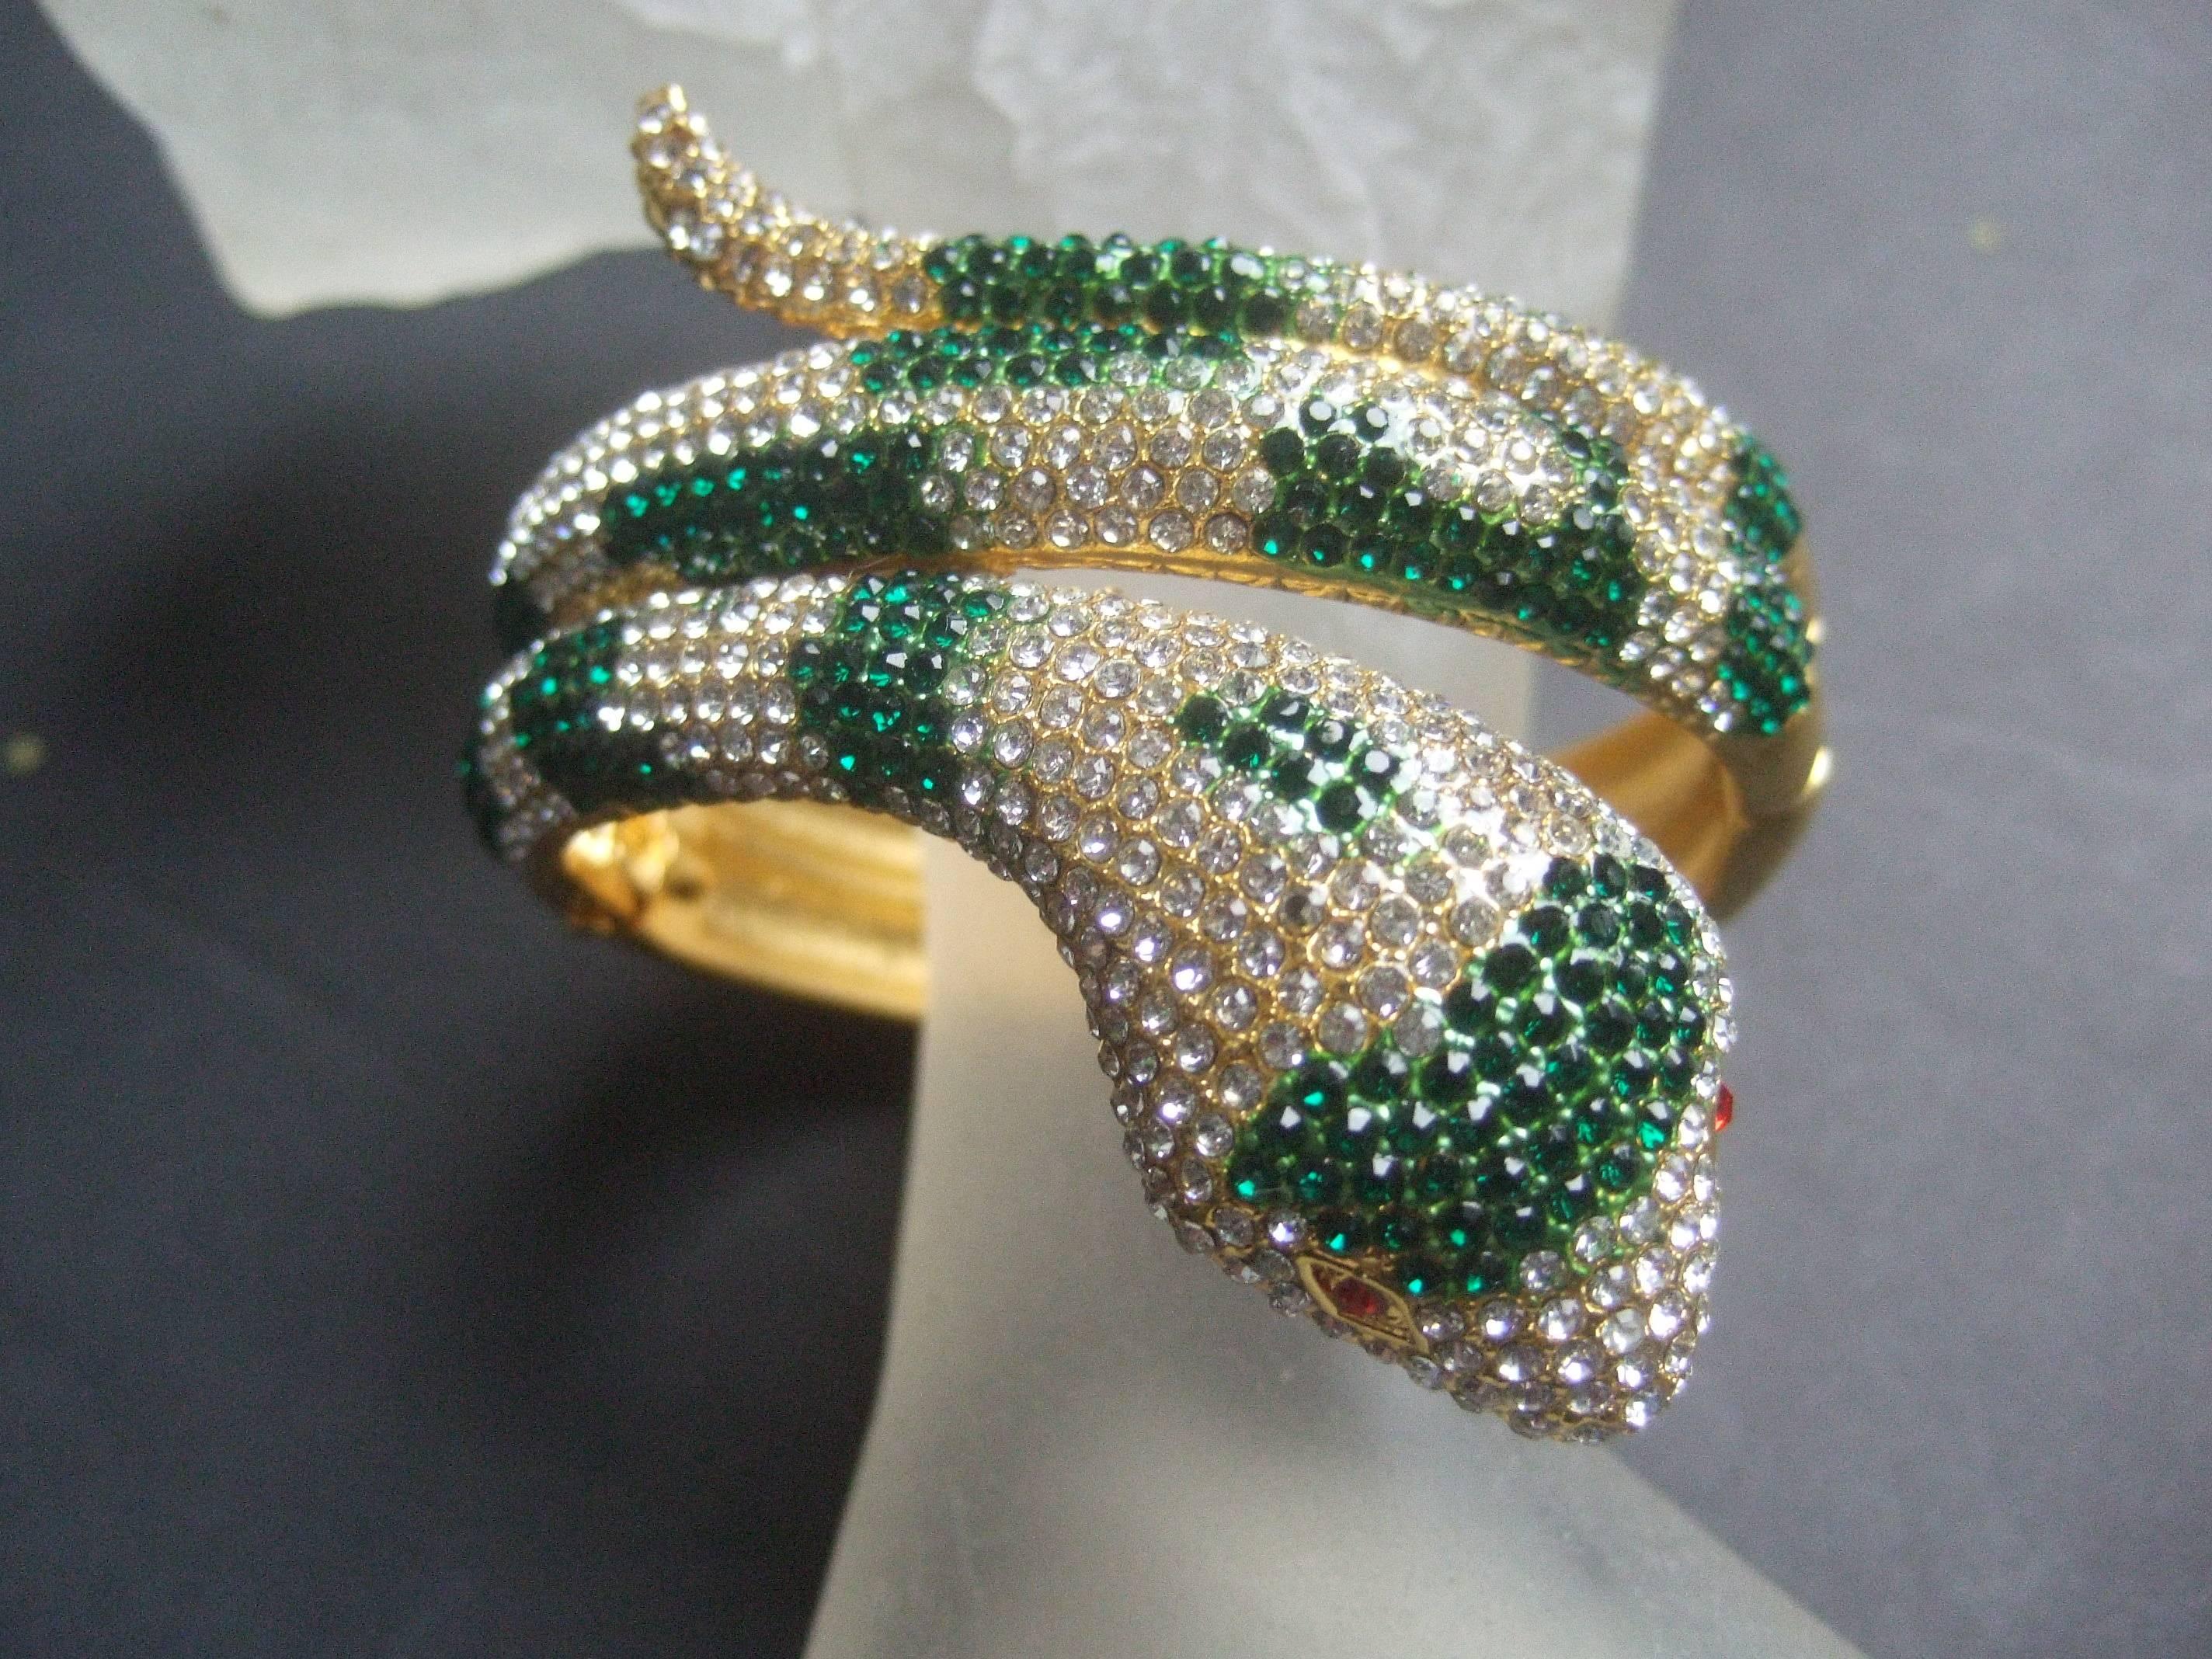 Glittering crystal hinged serpent bracelet 
The unique bracelet is designed with coiled
serpent encrusted with brilliant diamante 
& emerald green color crystals

The serpent's eyes are distinguished with 
ruby red color crystals. The hinged